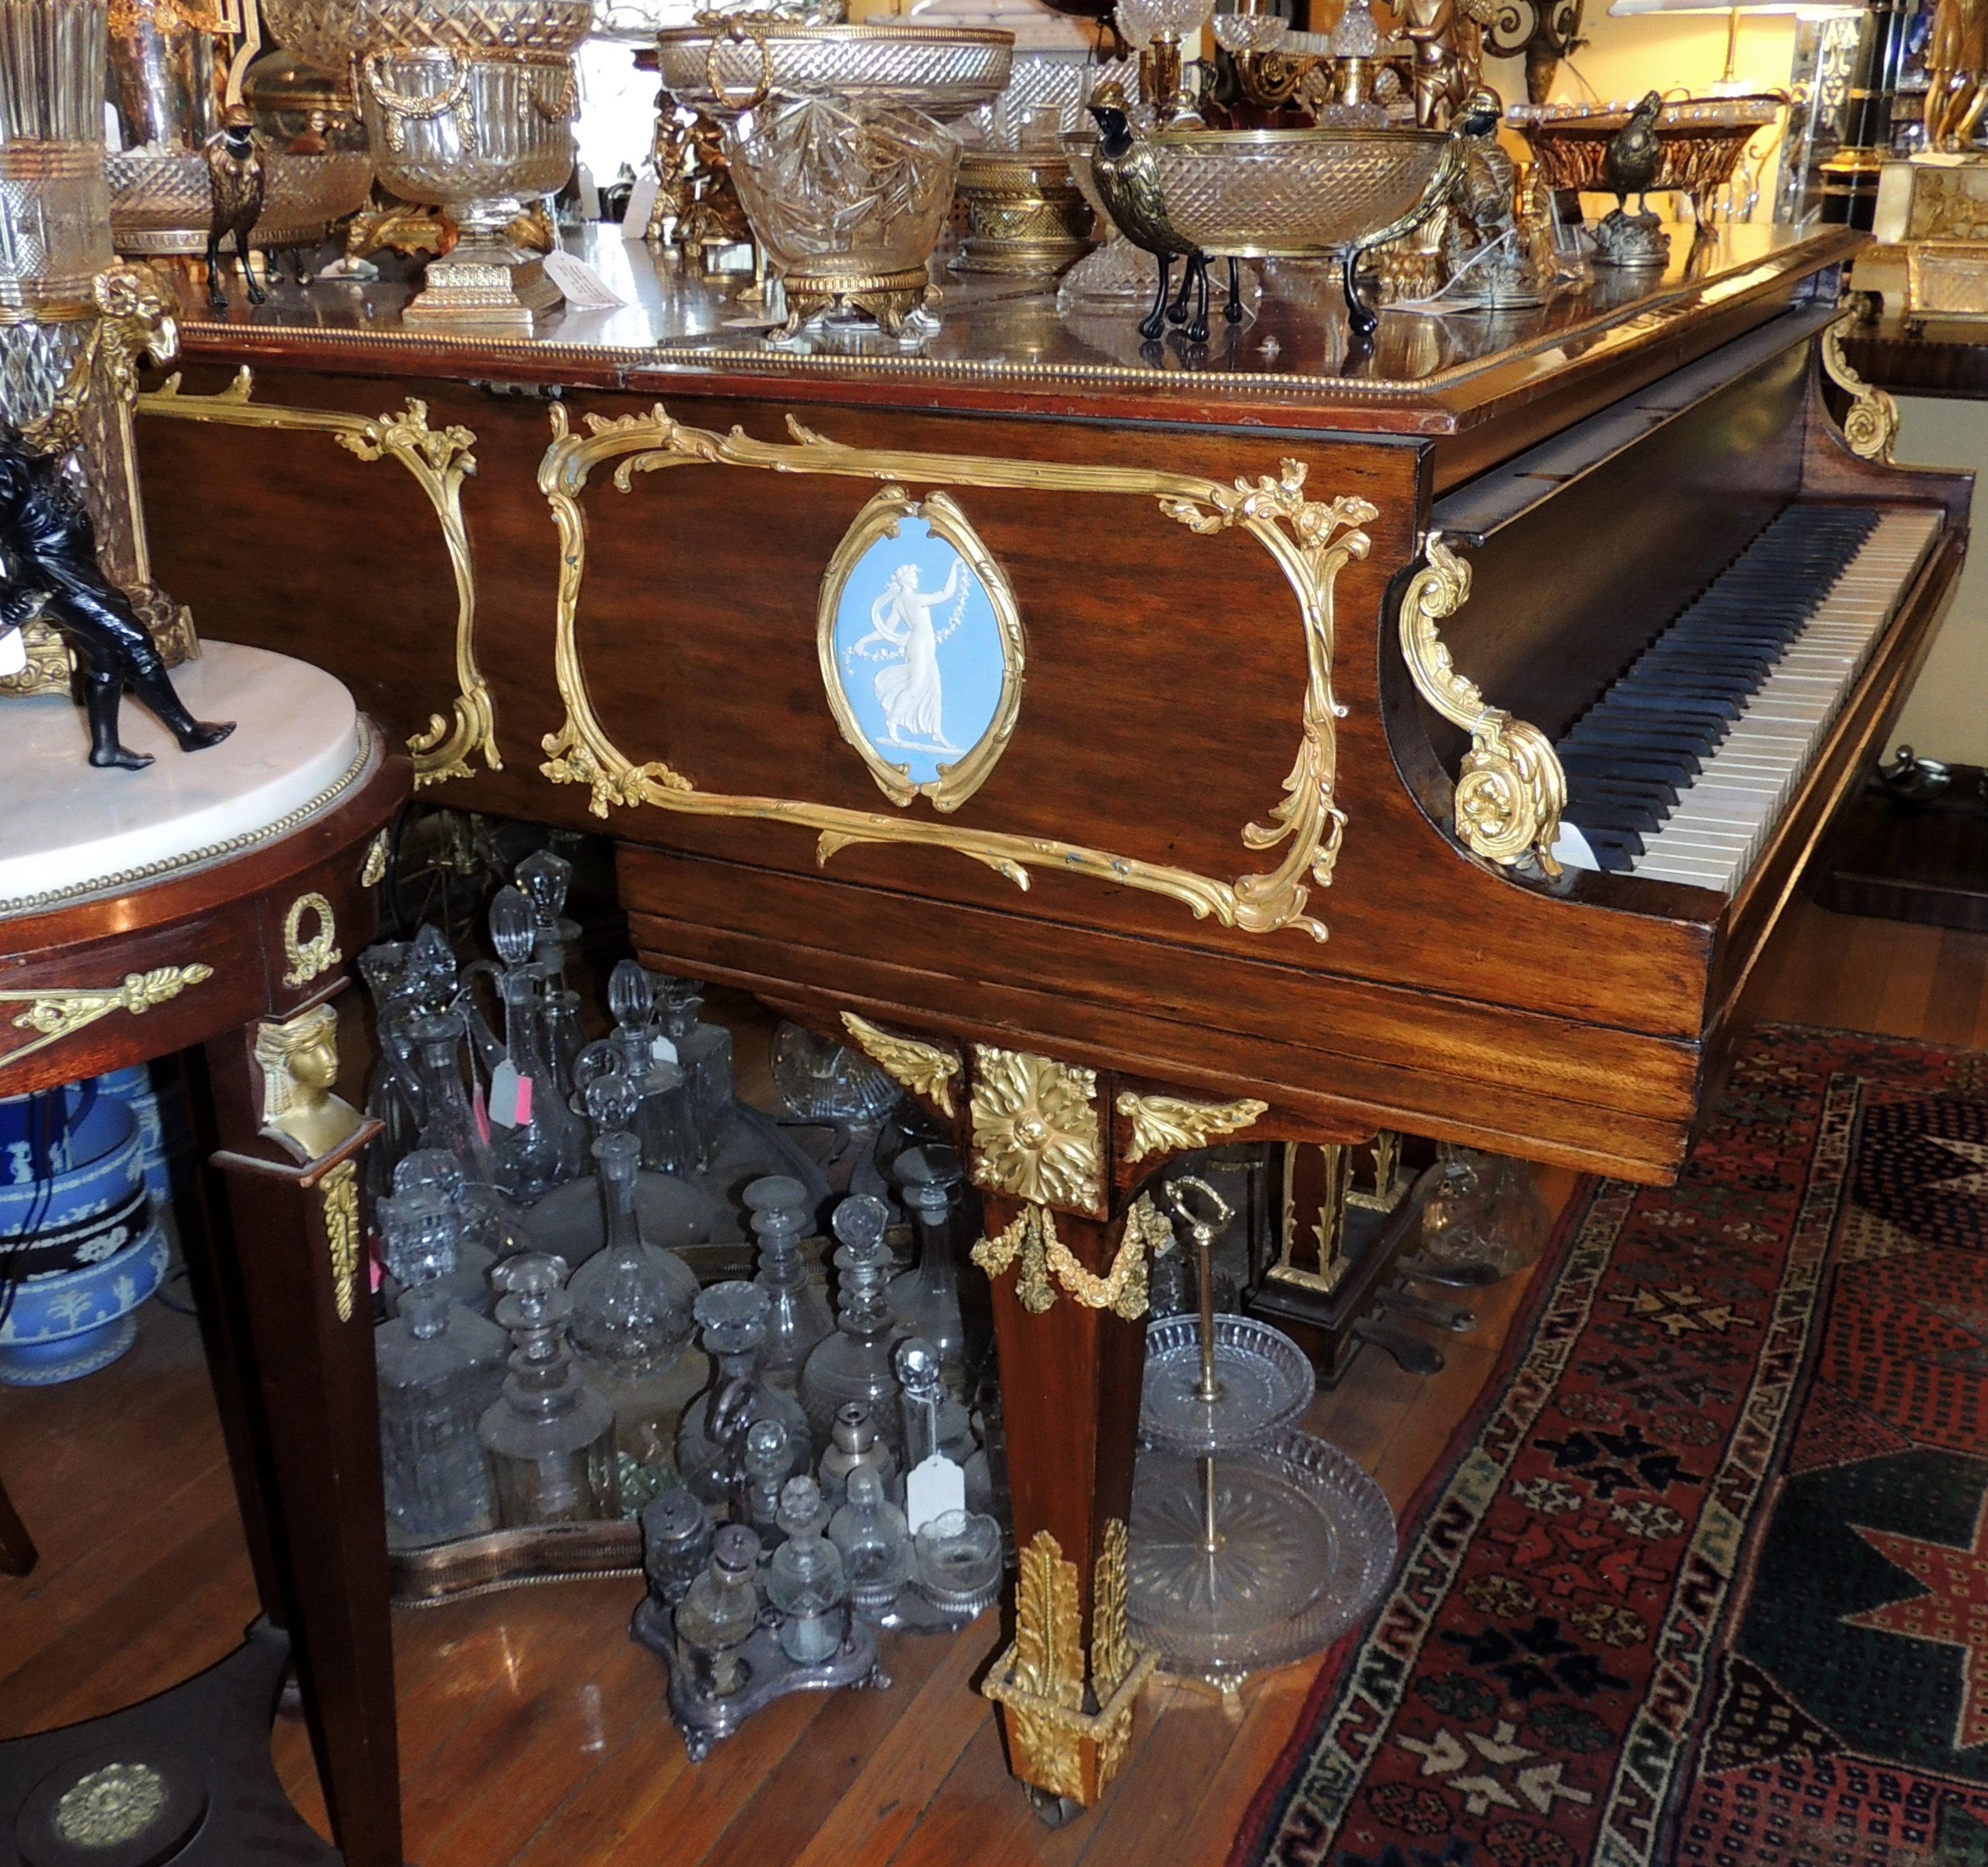 Steinway & Sons Ormolu Mounted Mahogany Baby Grand Piano
Model M, serial no. 244684, circa 1926
With Wedgwood Light Blue Jasperware / Wedgwood Framed Oval Plaques Decorated With Classical Female Figures In White Cameo Relief. 
Length 65 1/2 inches.